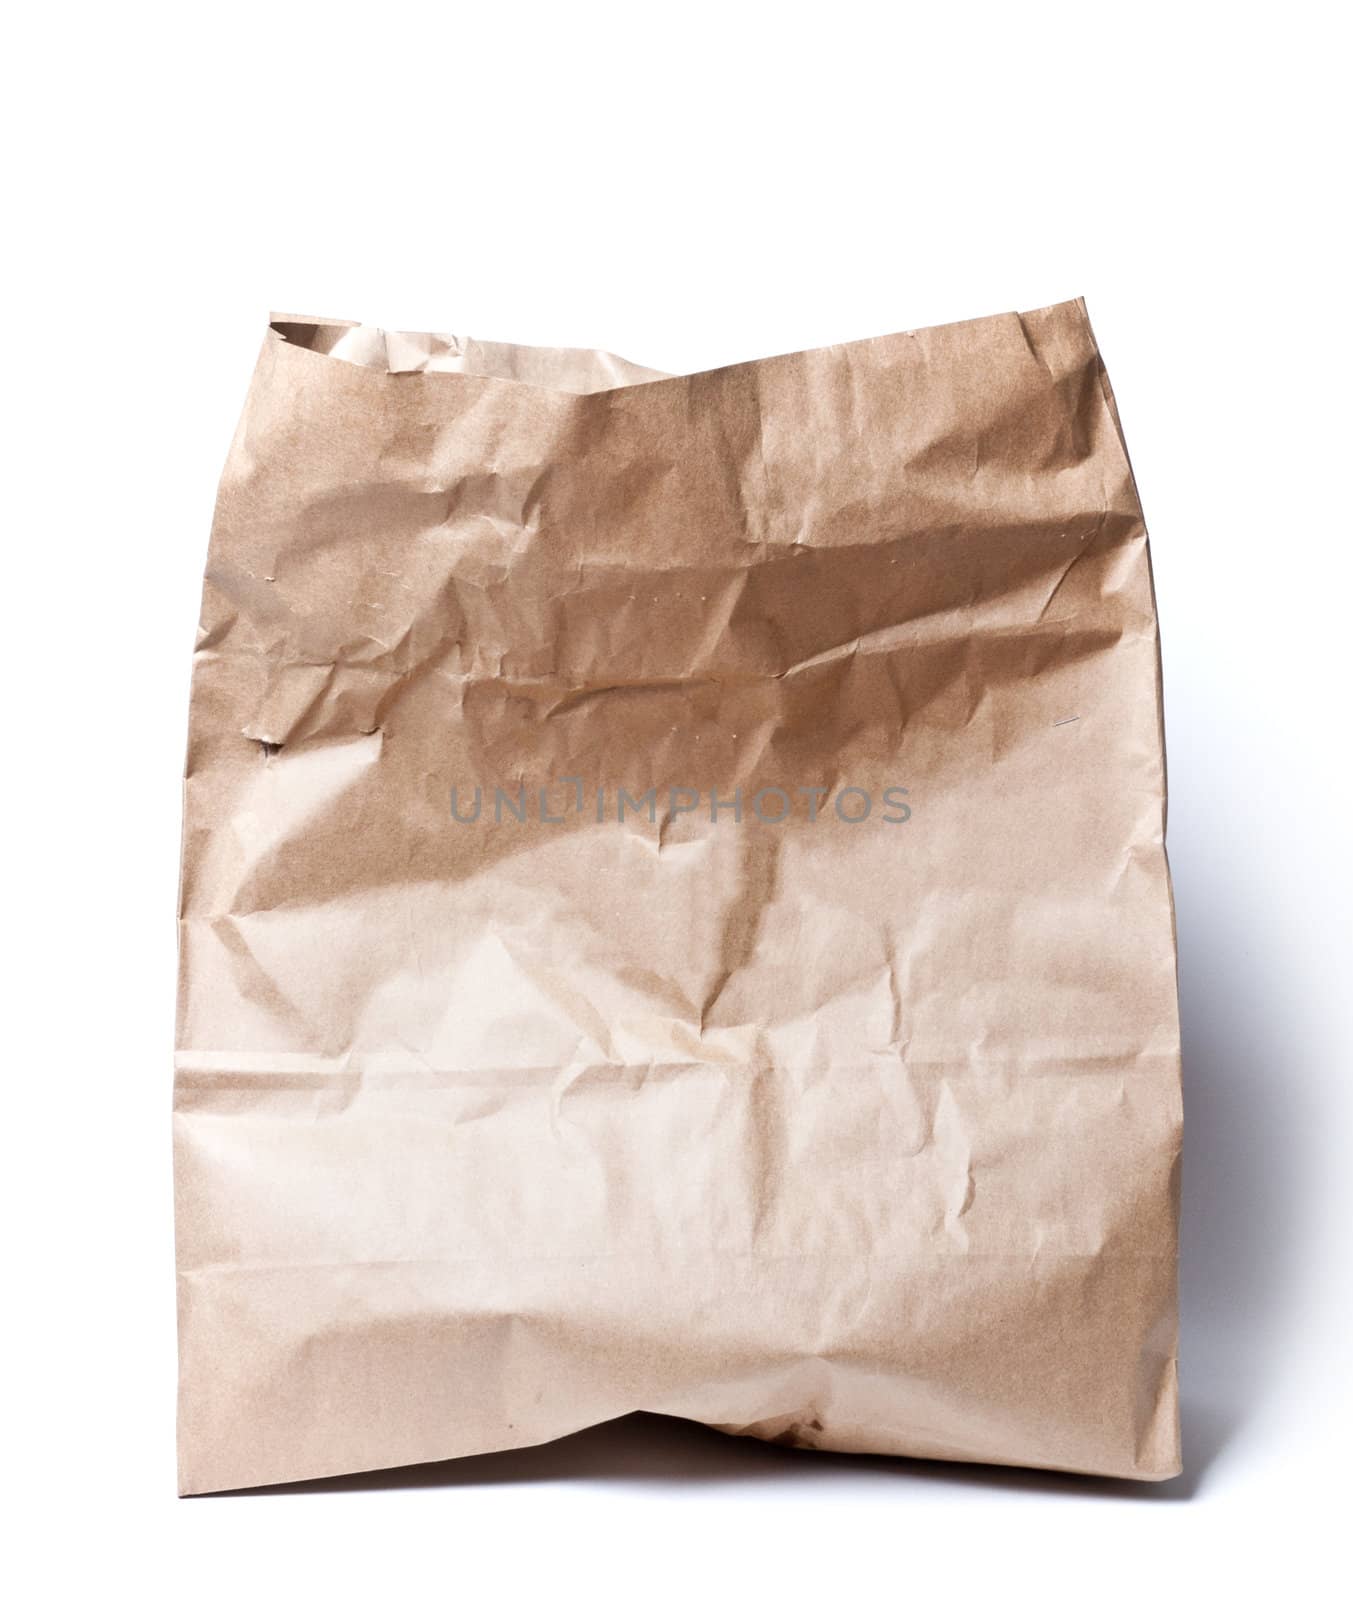 Isolated image of used brown paper bag made of recycled paper